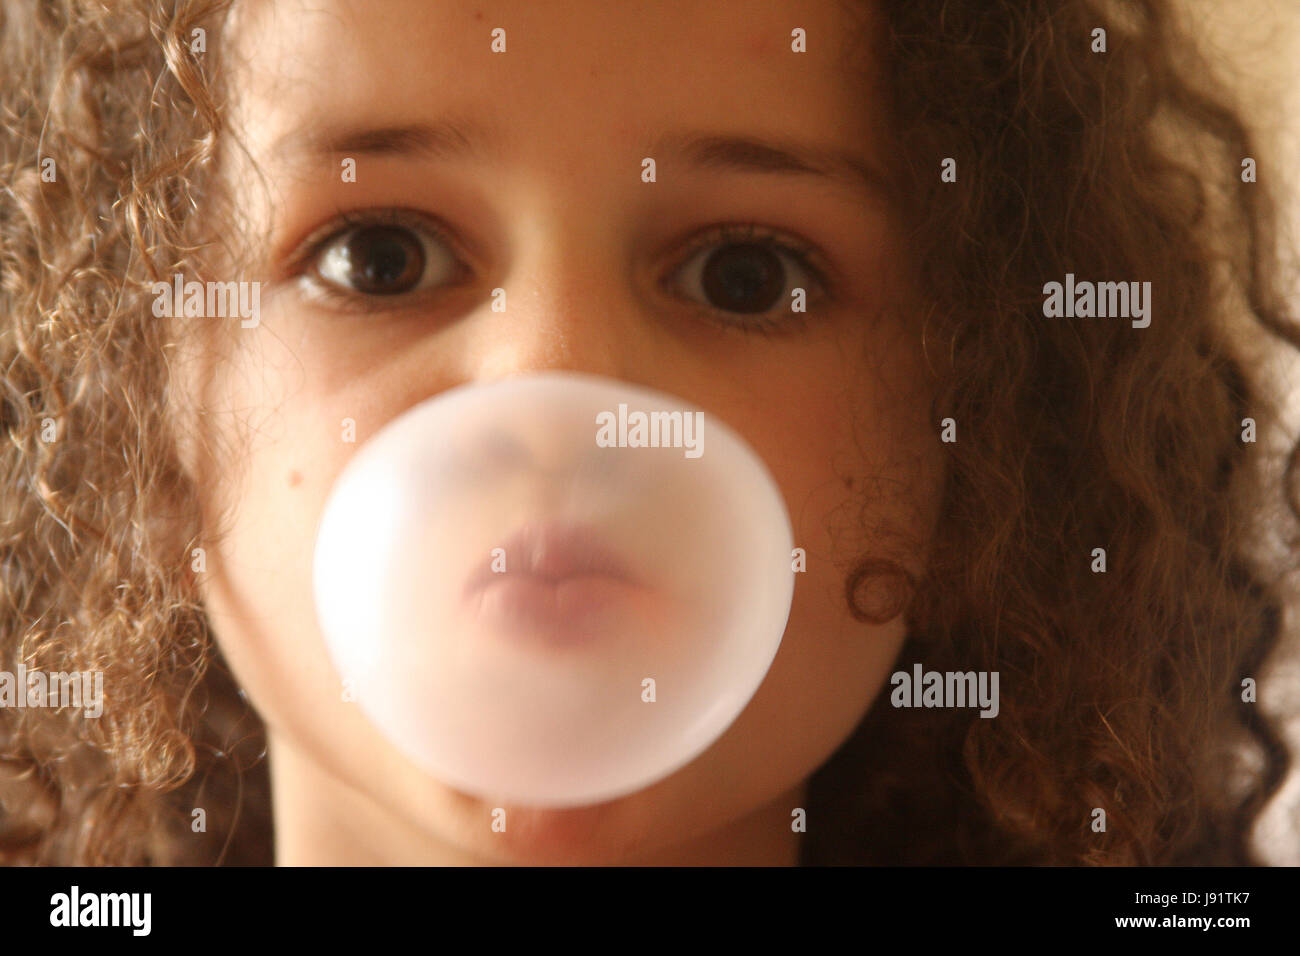 Little girl blowing bubbles from bubble gum Stock Photo